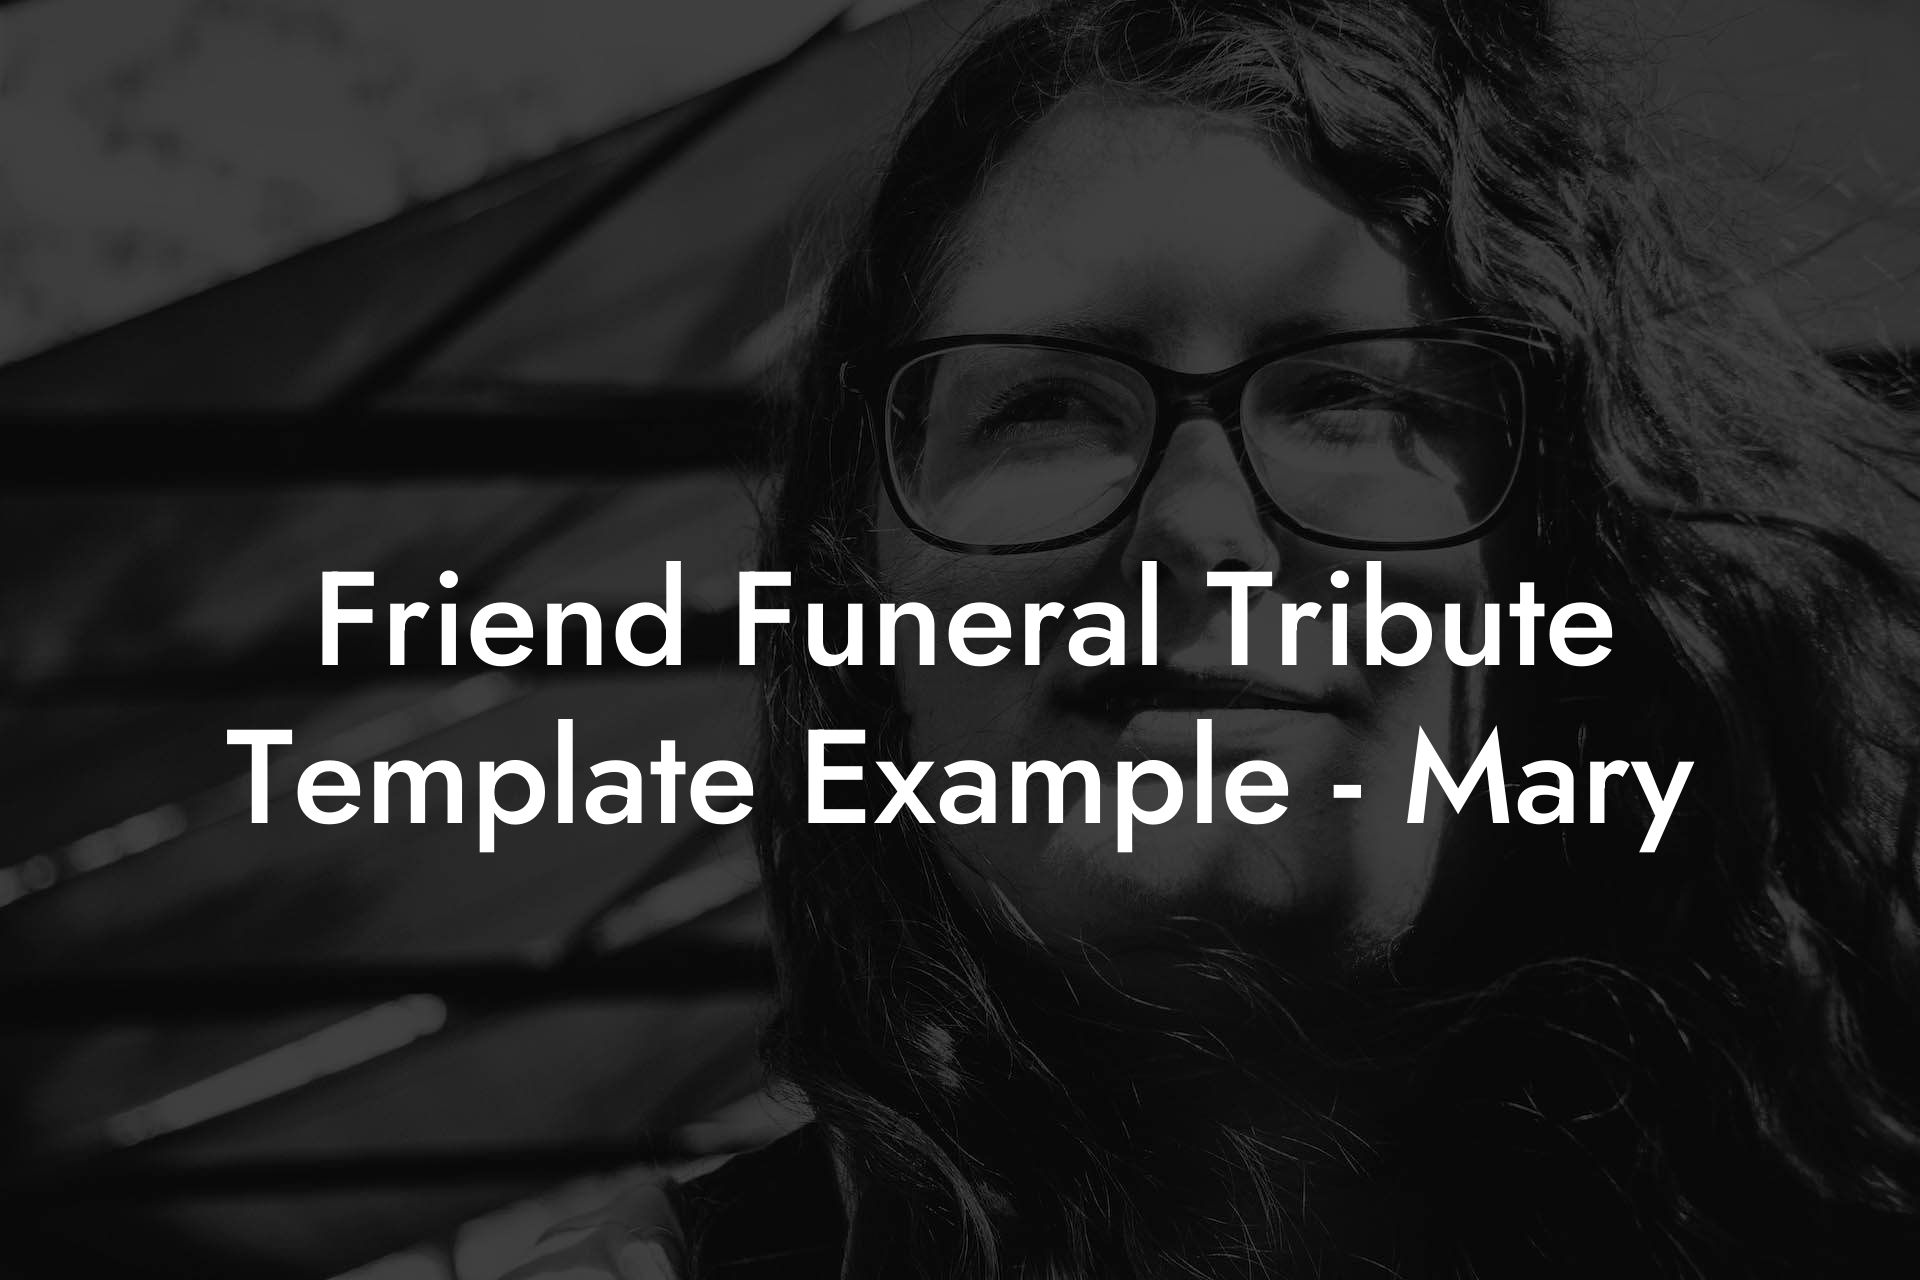 Friend Funeral Tribute Template Example - Mary